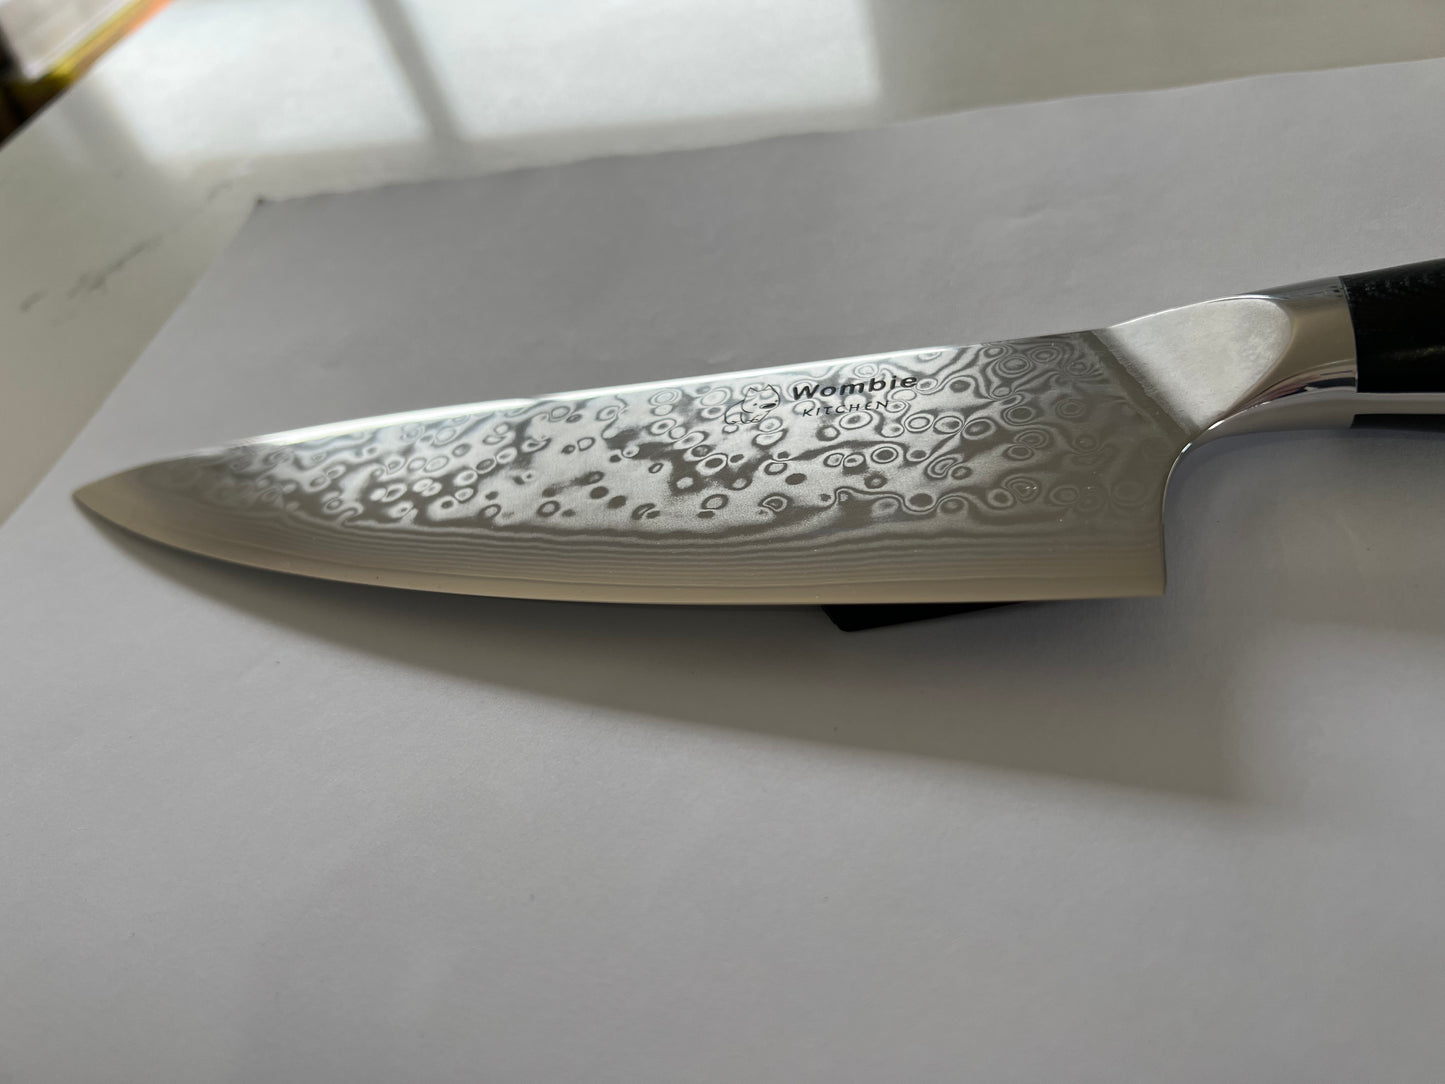 8 inch Chef Knife _ Gladius Series (with widened blade) _ Pro